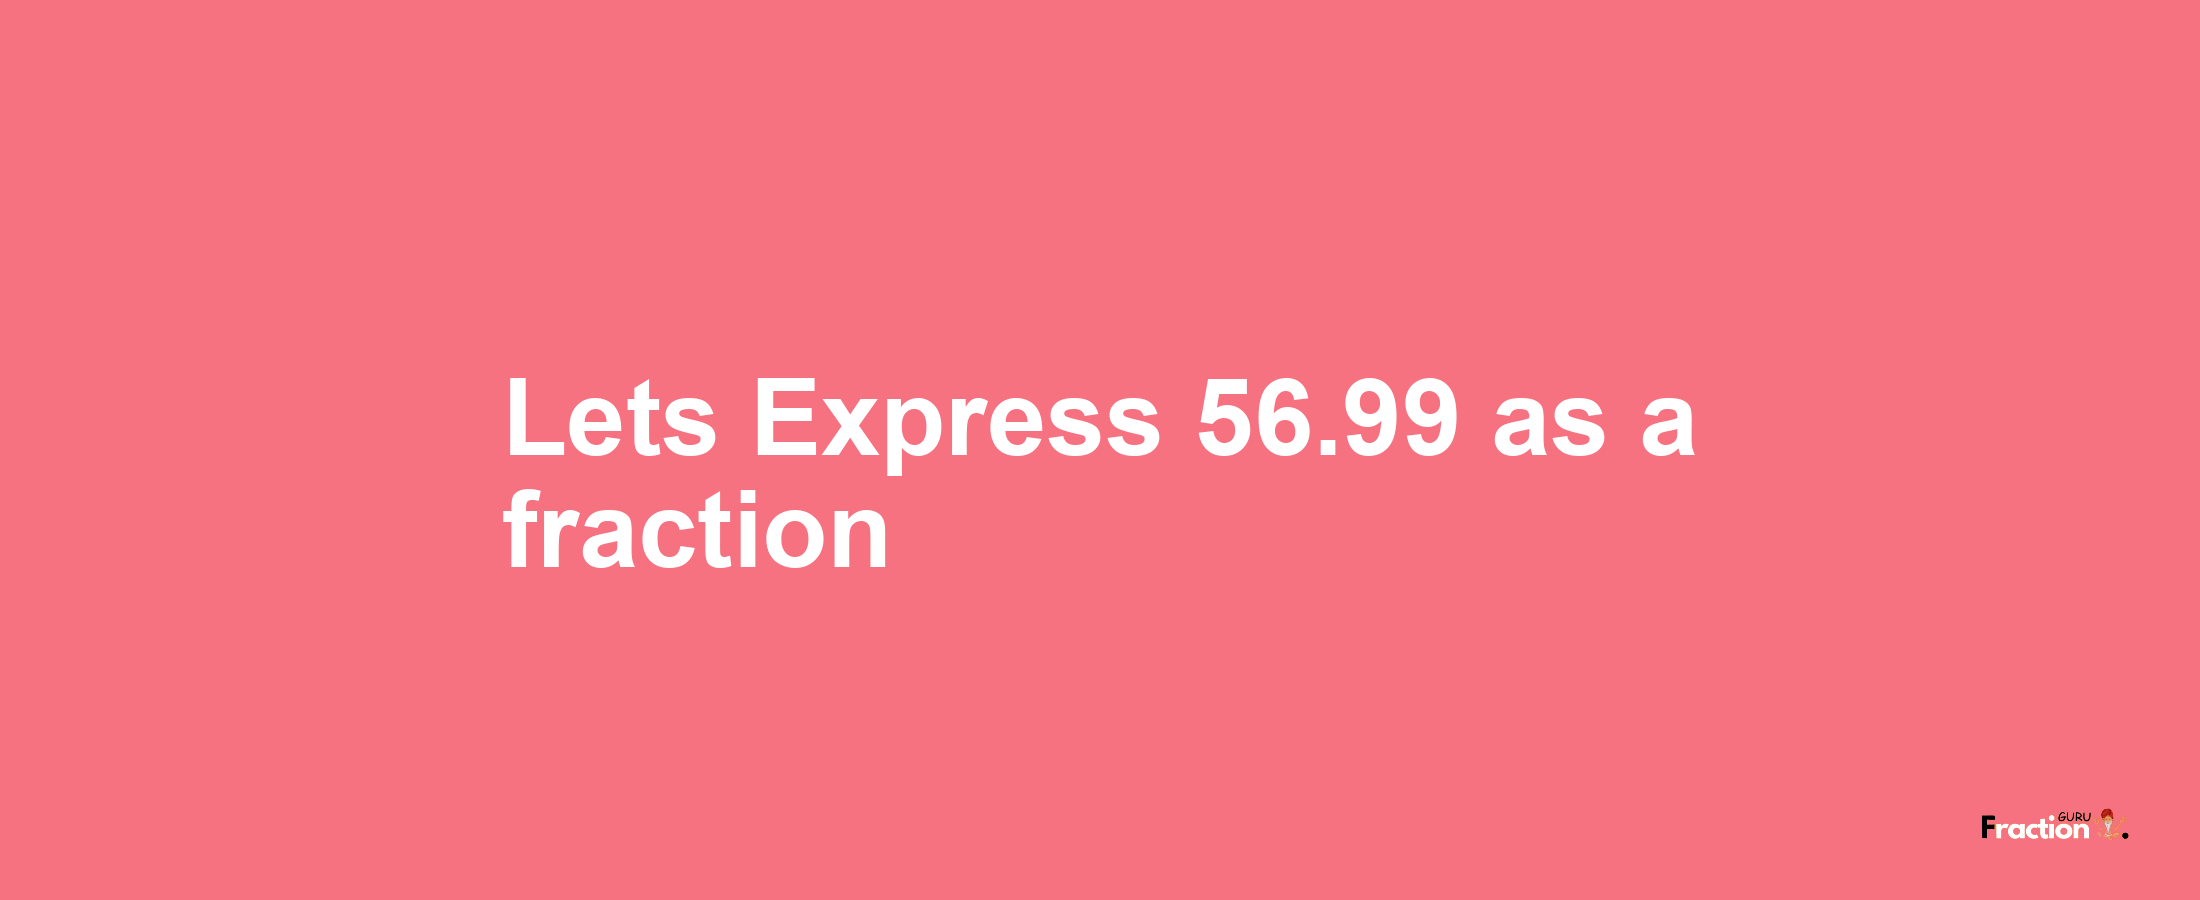 Lets Express 56.99 as afraction